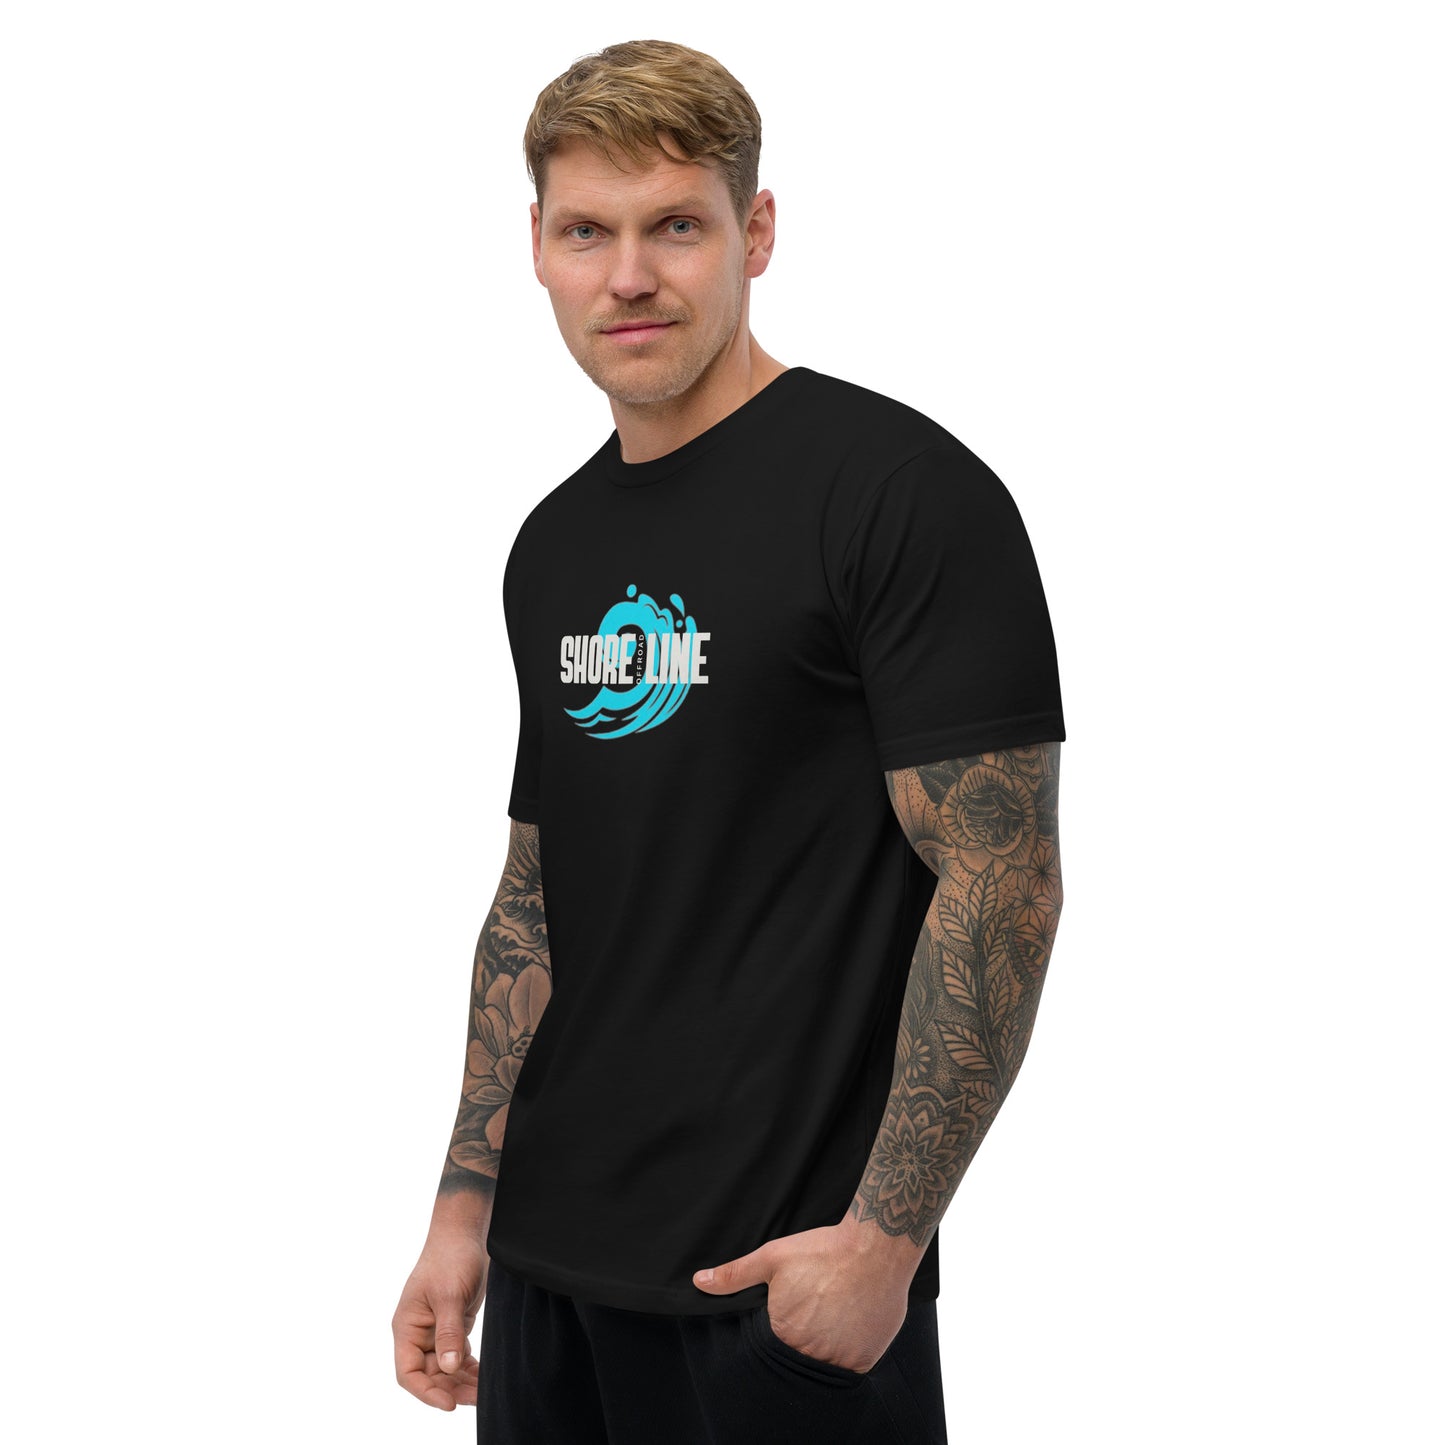 a man wearing a black t - shirt with the words surf zone on it